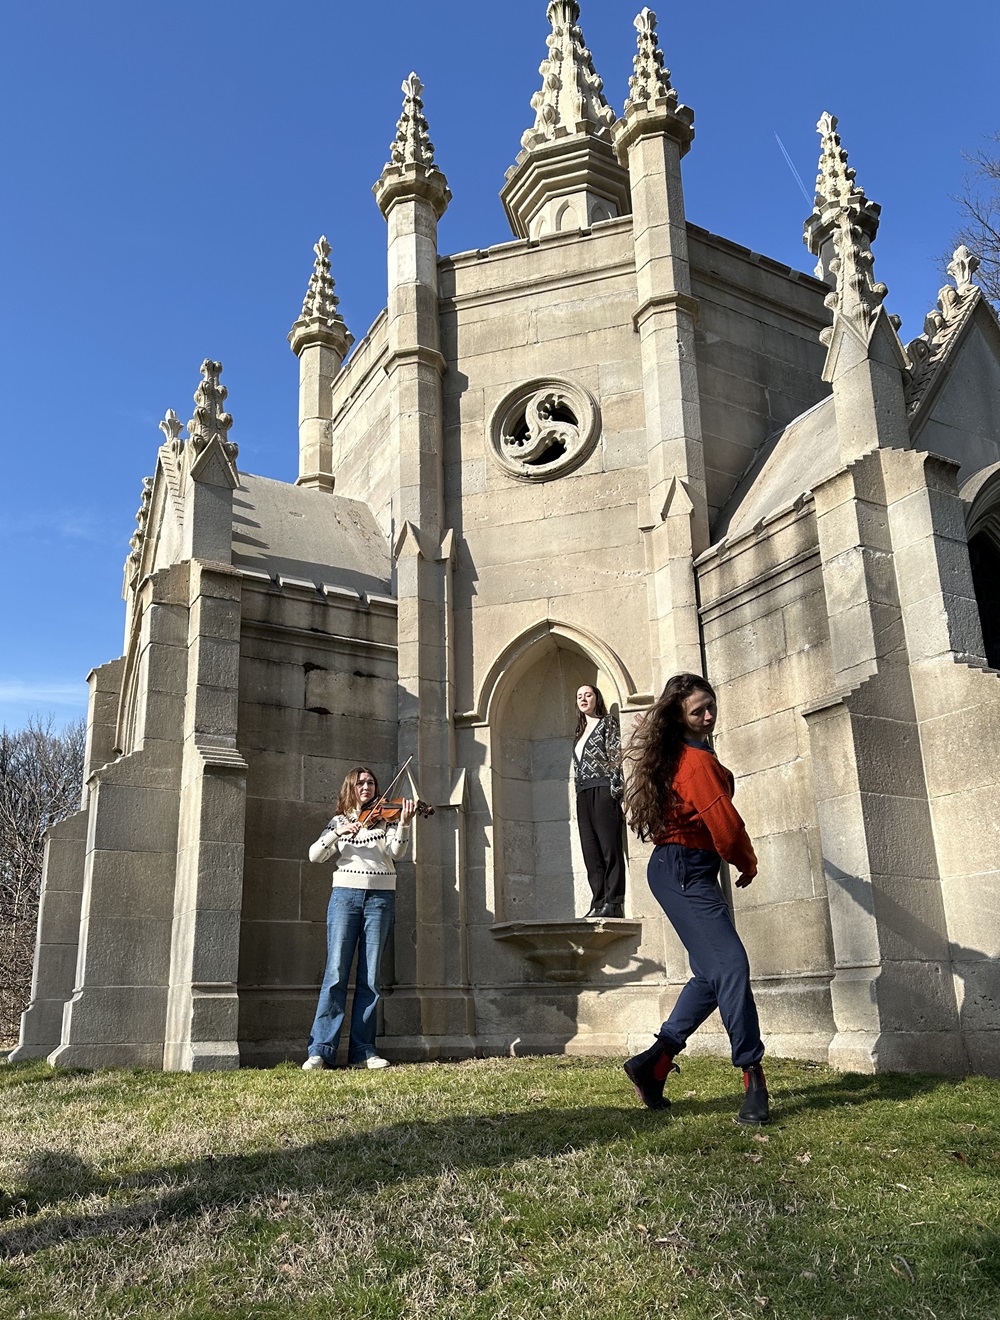 "And Then, Now": An Immersive Dance Experience at Green-Wood Cemetery